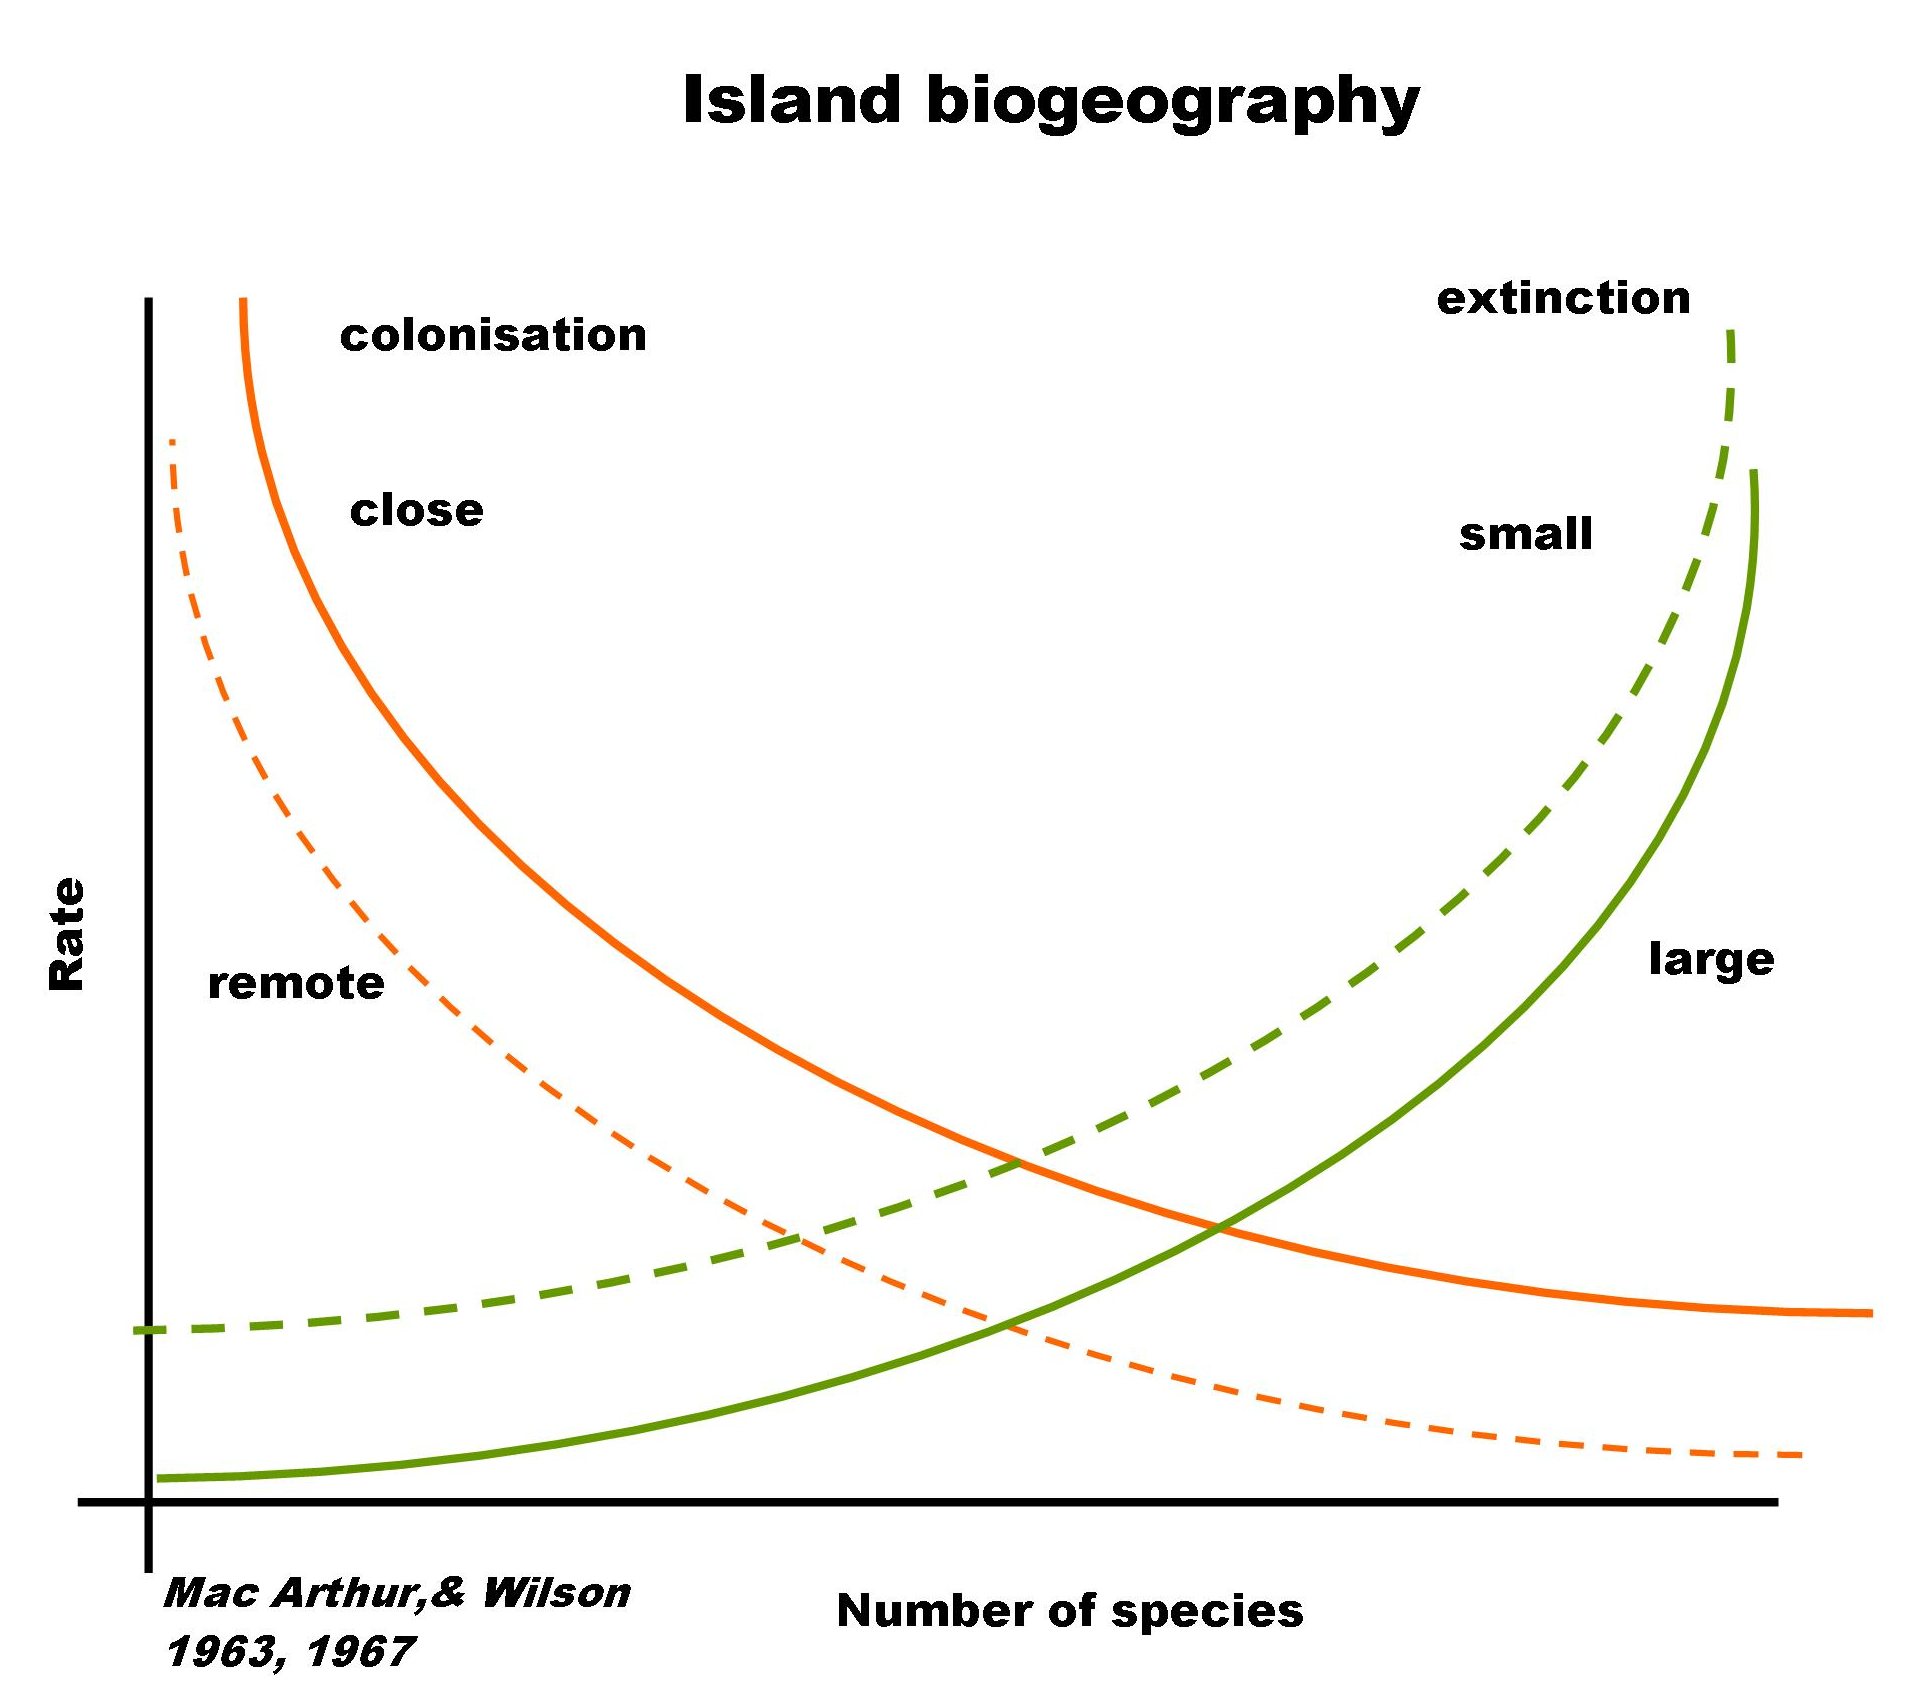 Graph depicting island biogeography model where extinction rate is plotted against species richness and island size.